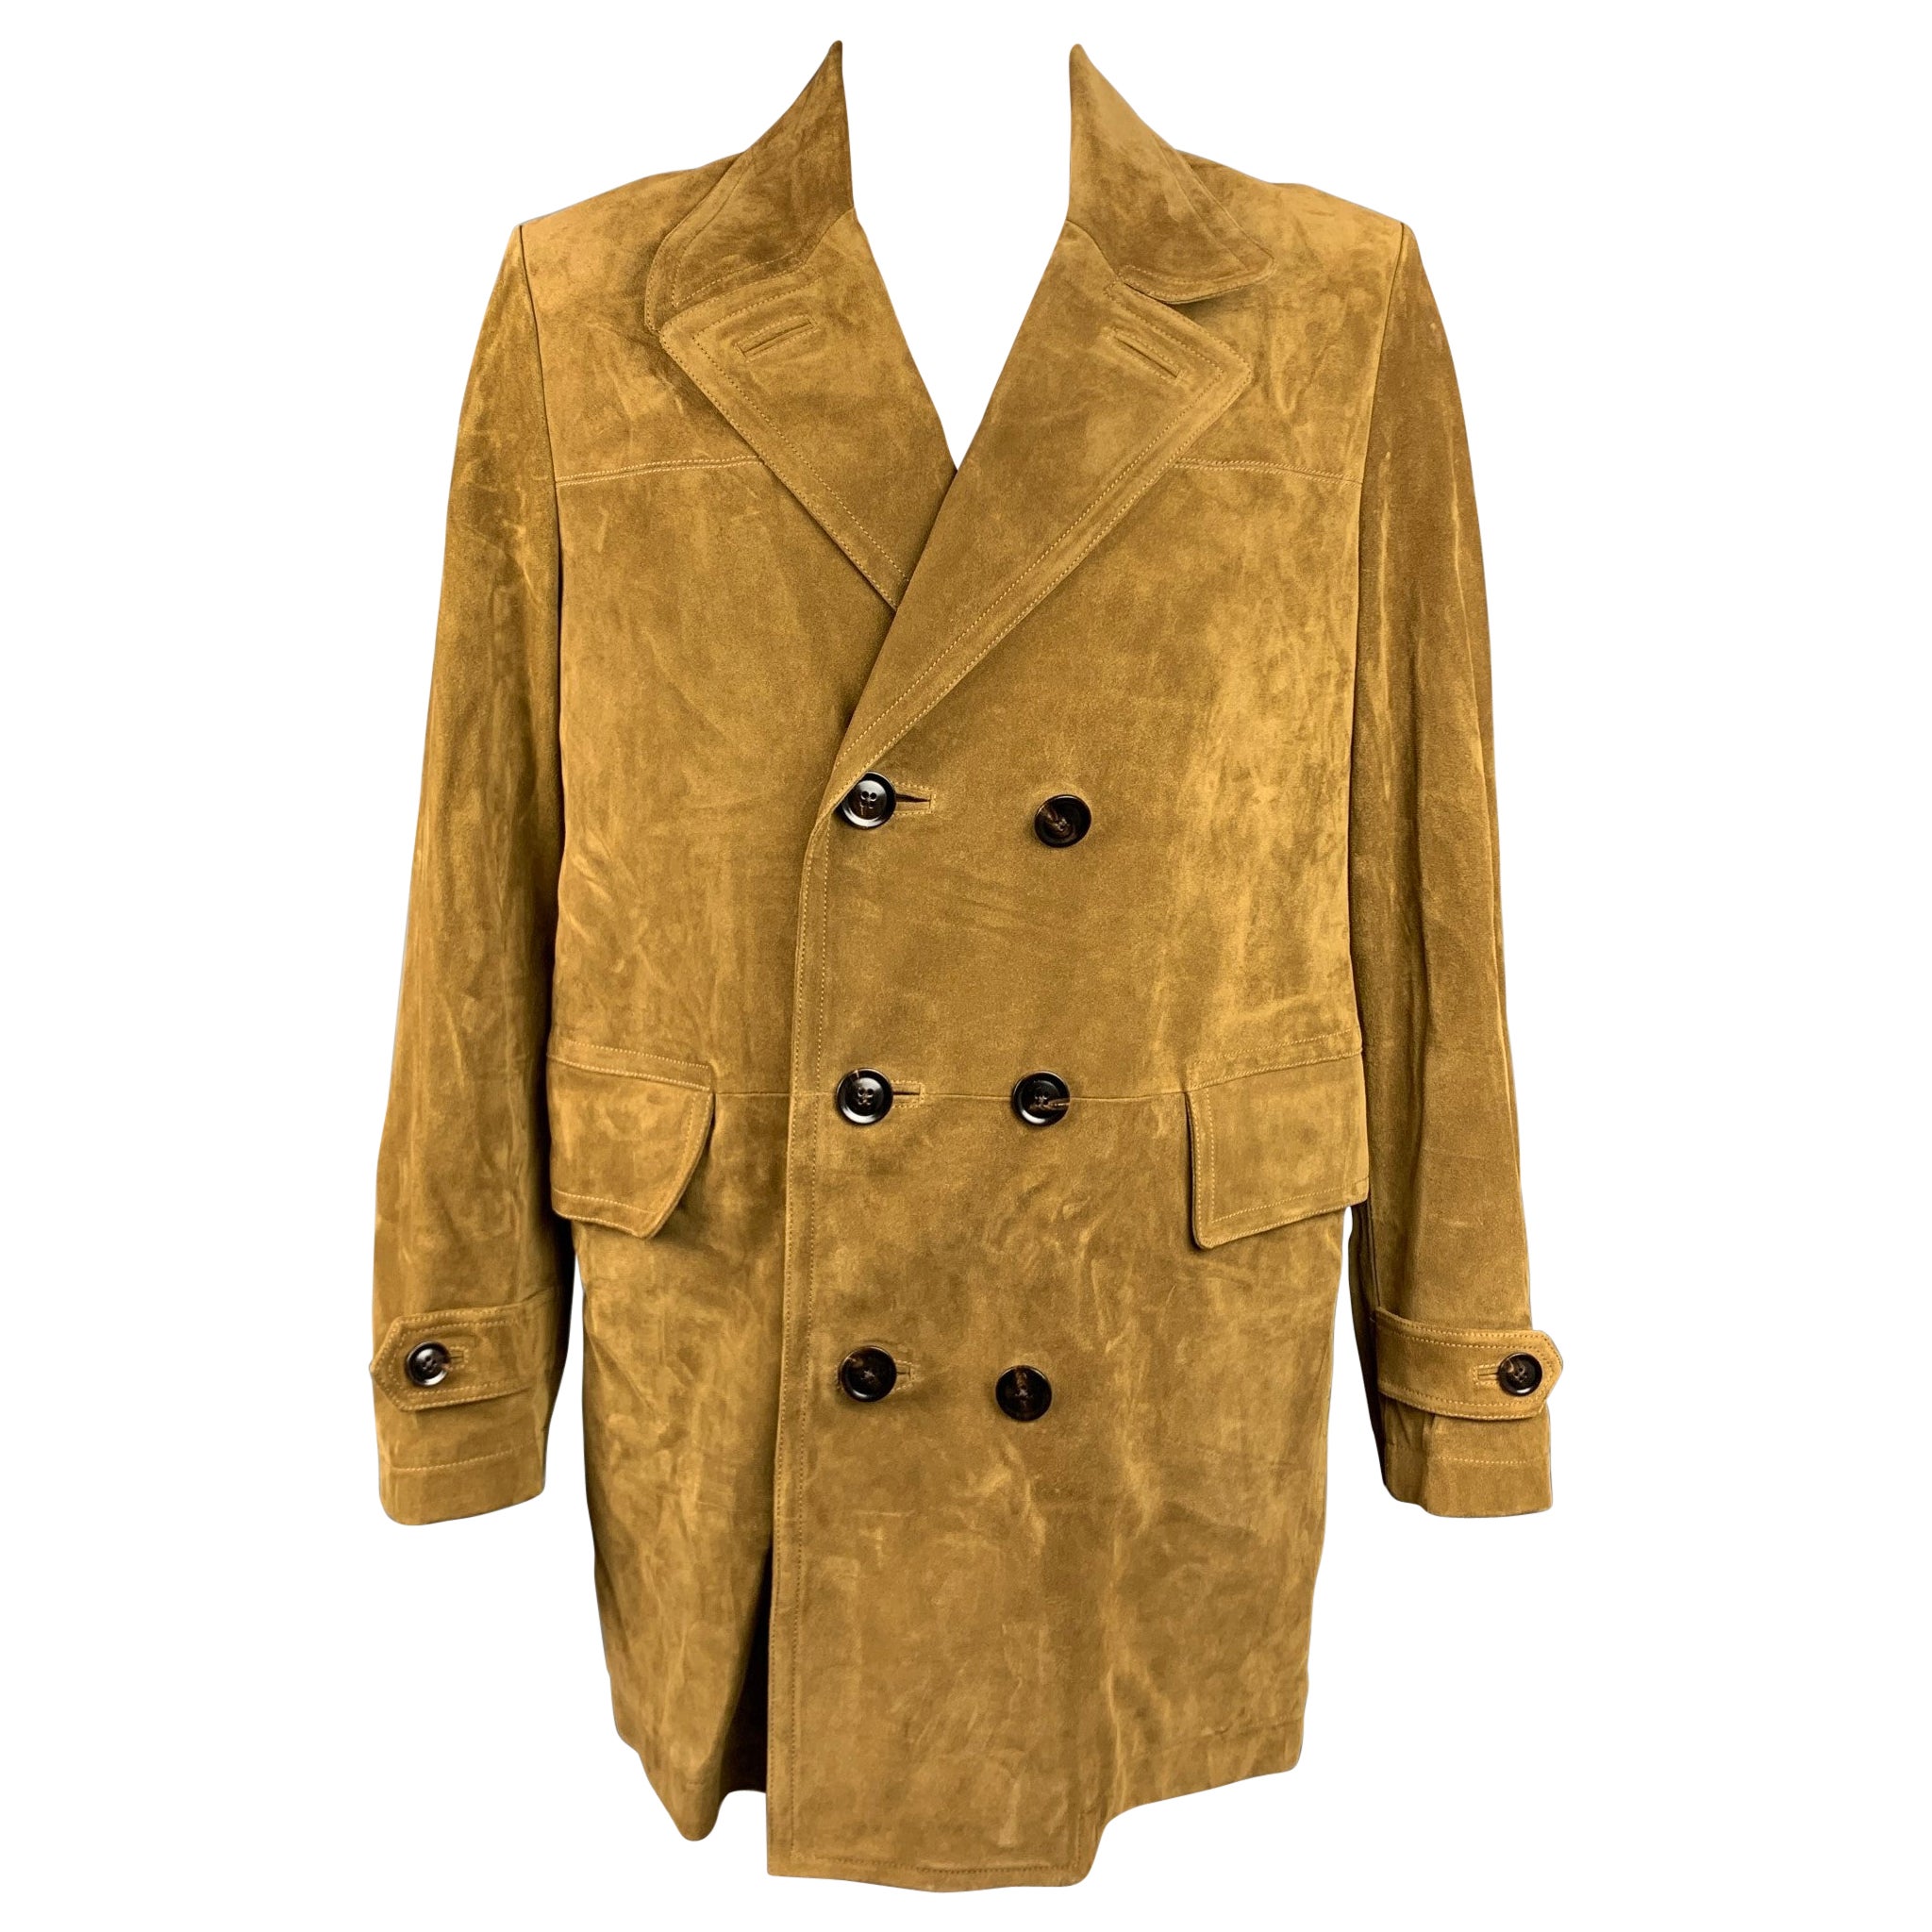 TOM FORD Size 48 Tan Textured Leather Double Breasted Coat